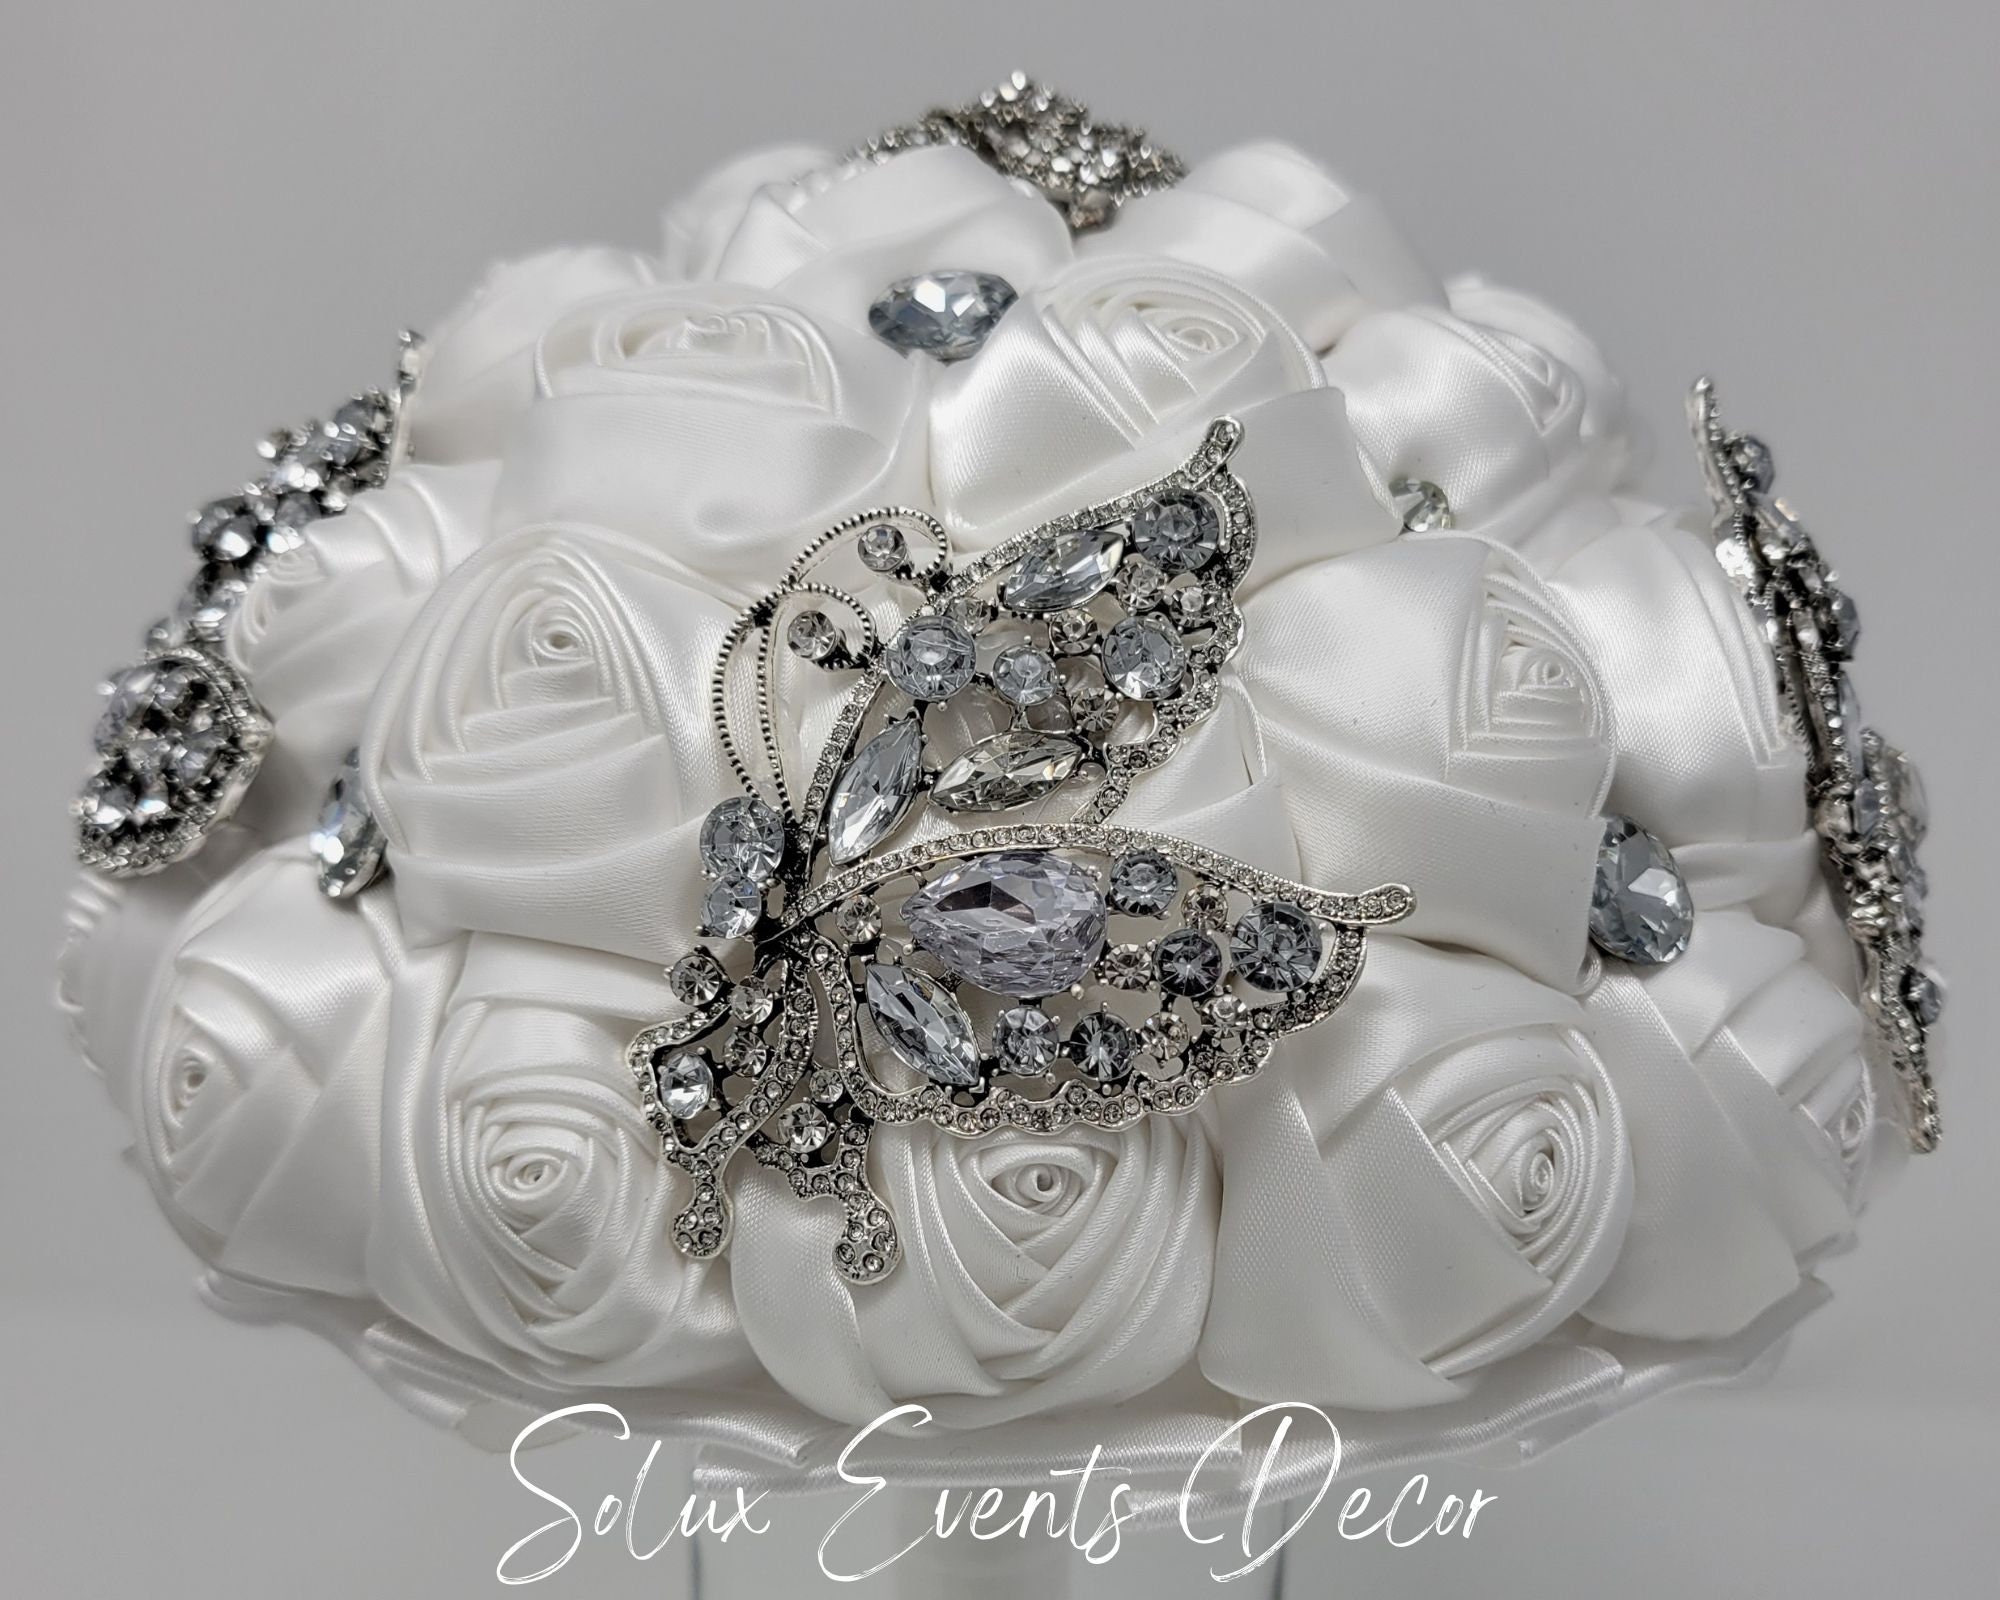 BUTTERFLIES~EMR Satin Rose Brooch Bouquet or DIY KIT – Bouquets by